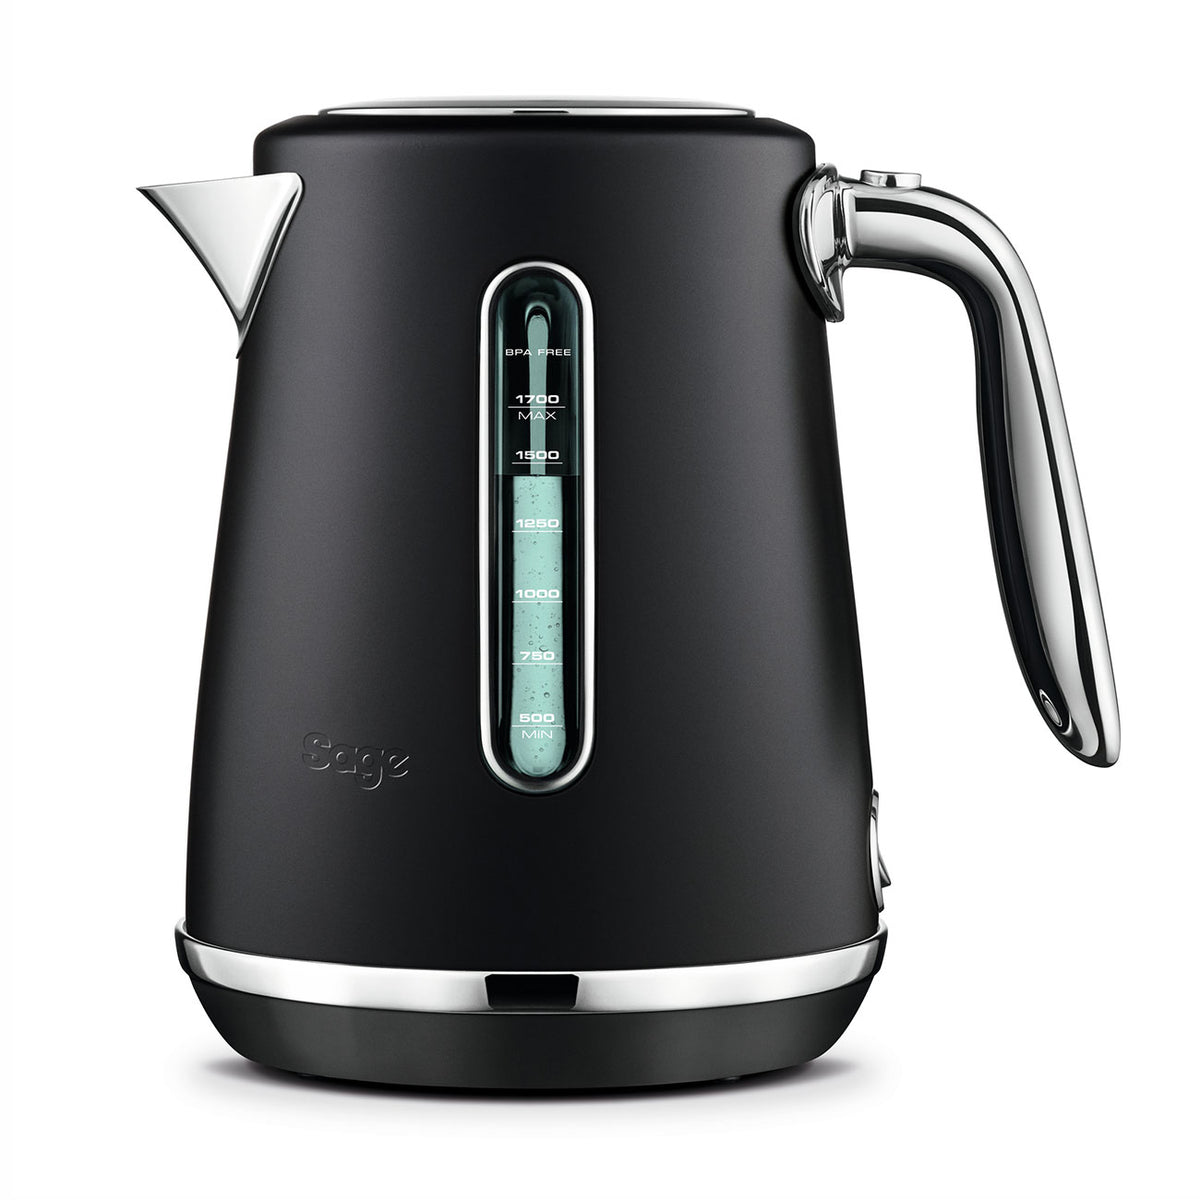 Sage The Soft Top Luxe 1.7L 2400W Kettle - Black Truffle | SKE735BTR4GUK1 from Sage - DID Electrical